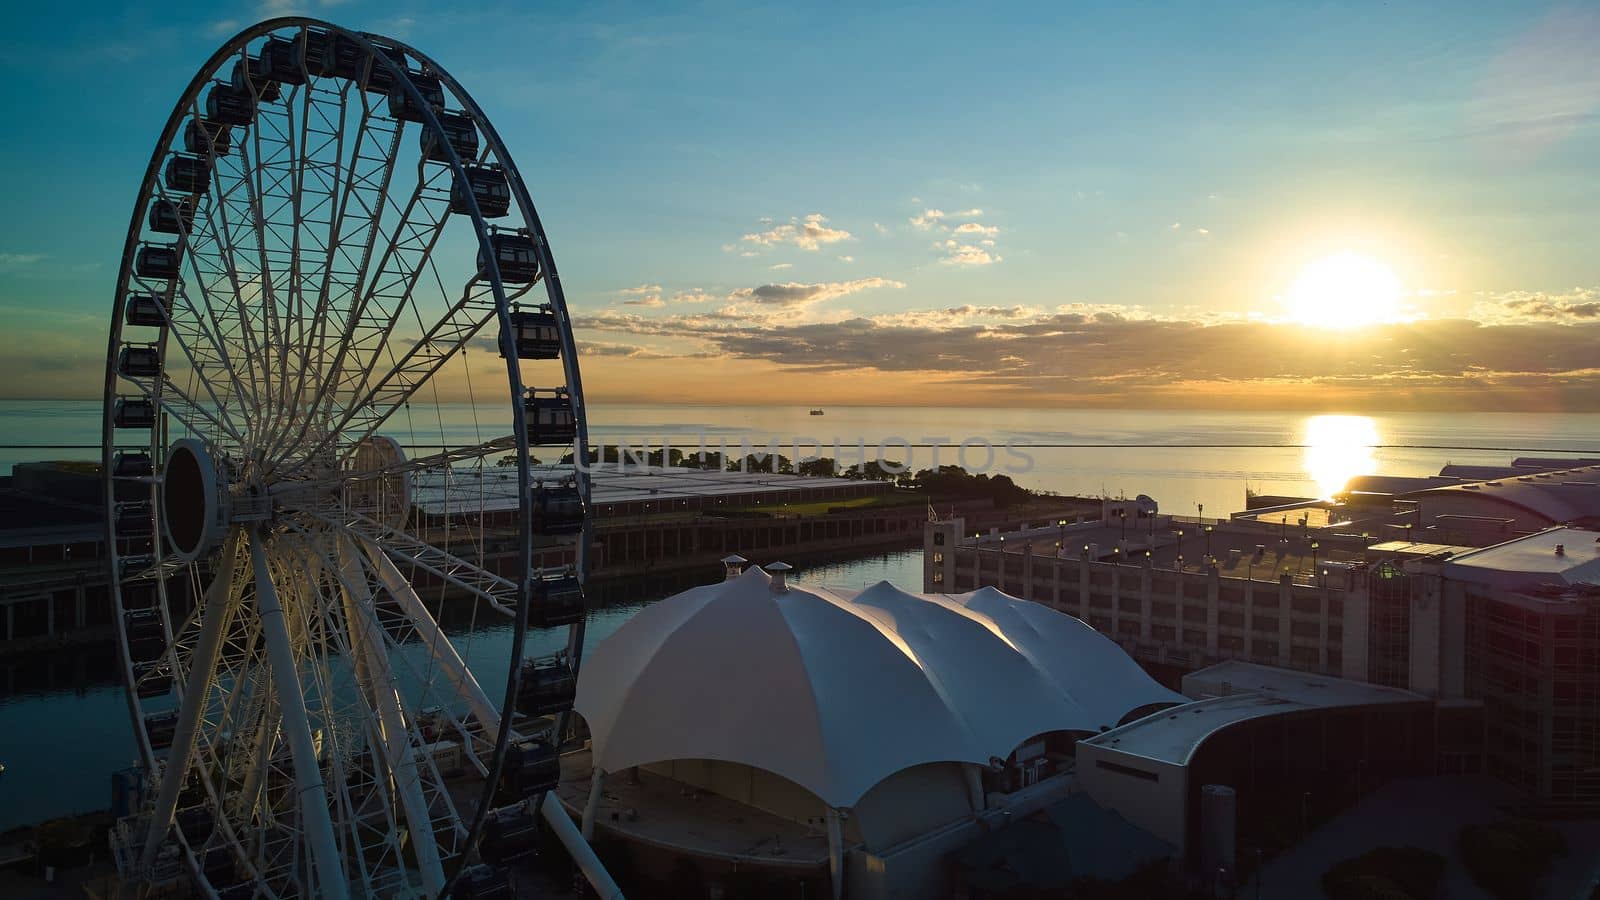 Navy Pier ferris wheel at sunrise in Chicago by njproductions